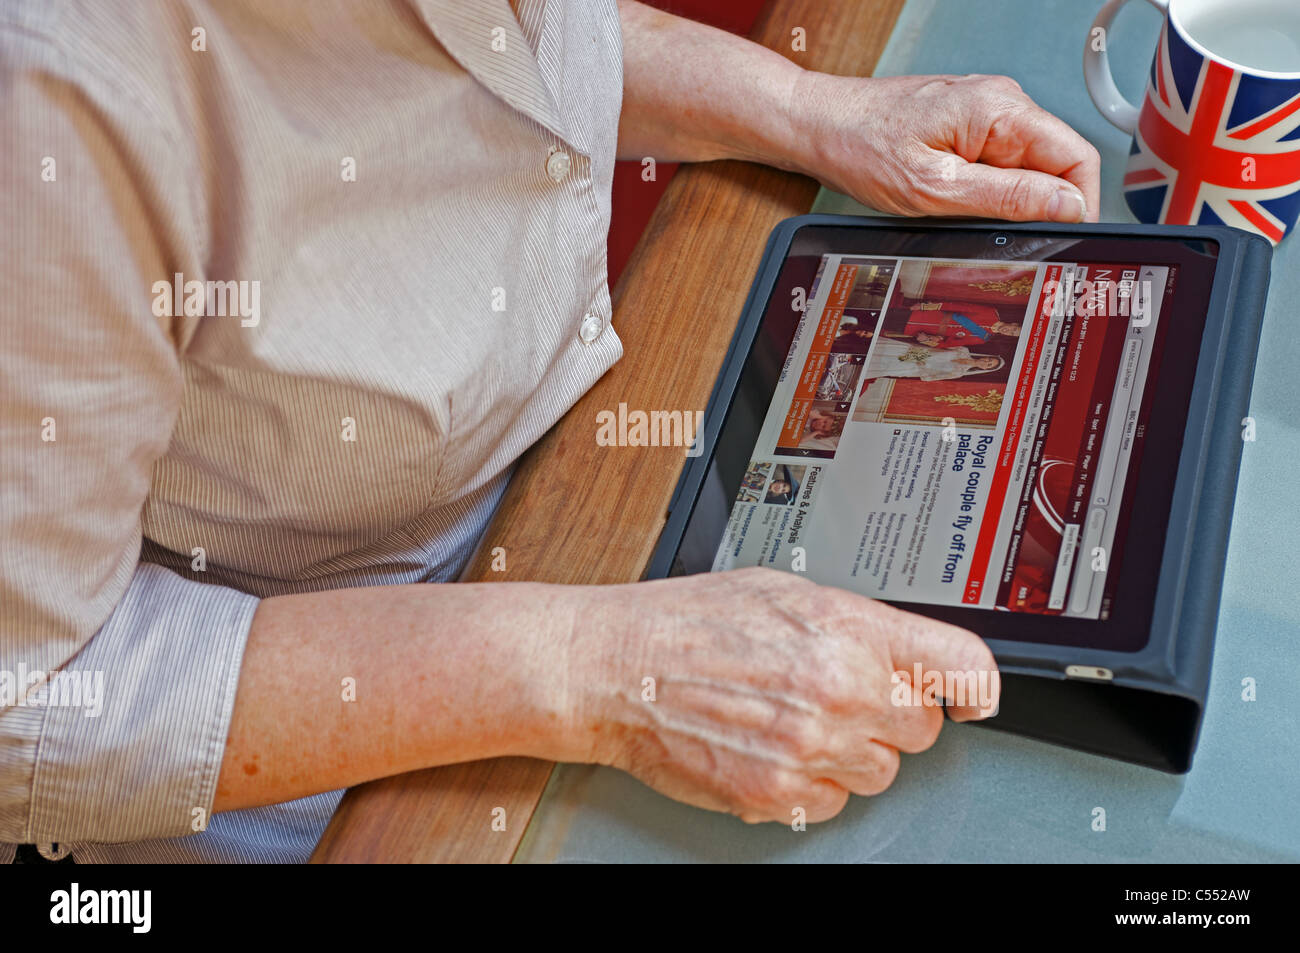 Woman using an Apple iPad tablet computer to view the BBC news website Stock Photo